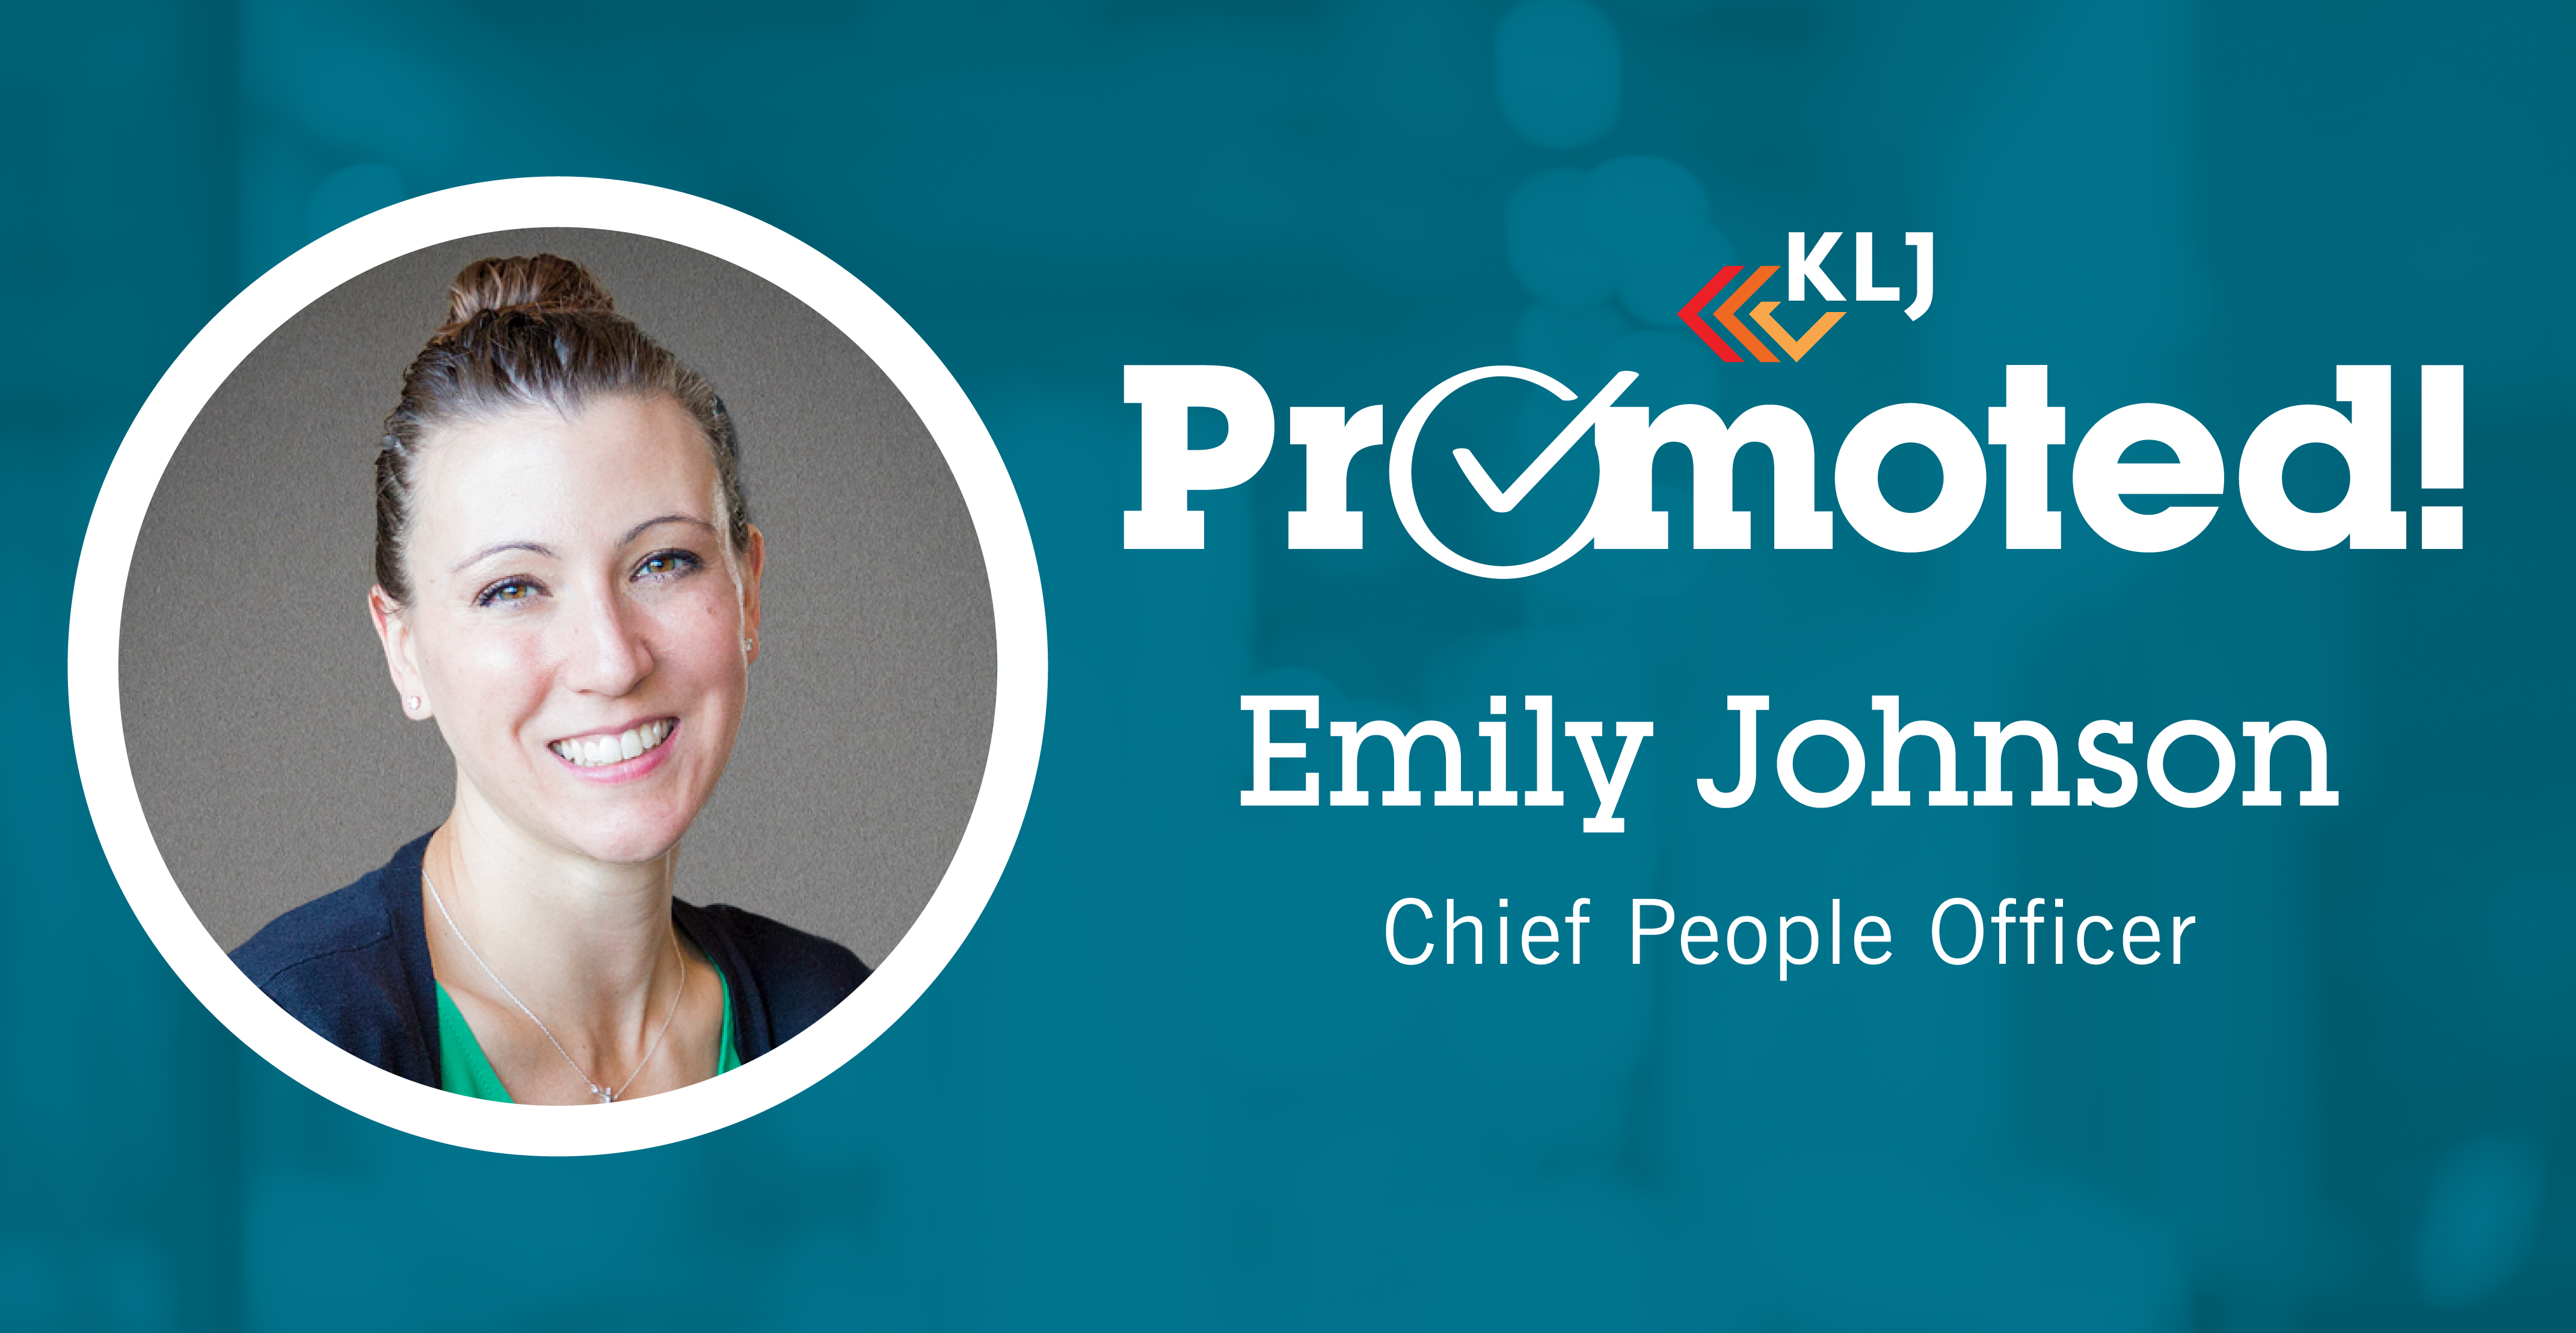 KLJ Promotes Johnson to Chief People Officer